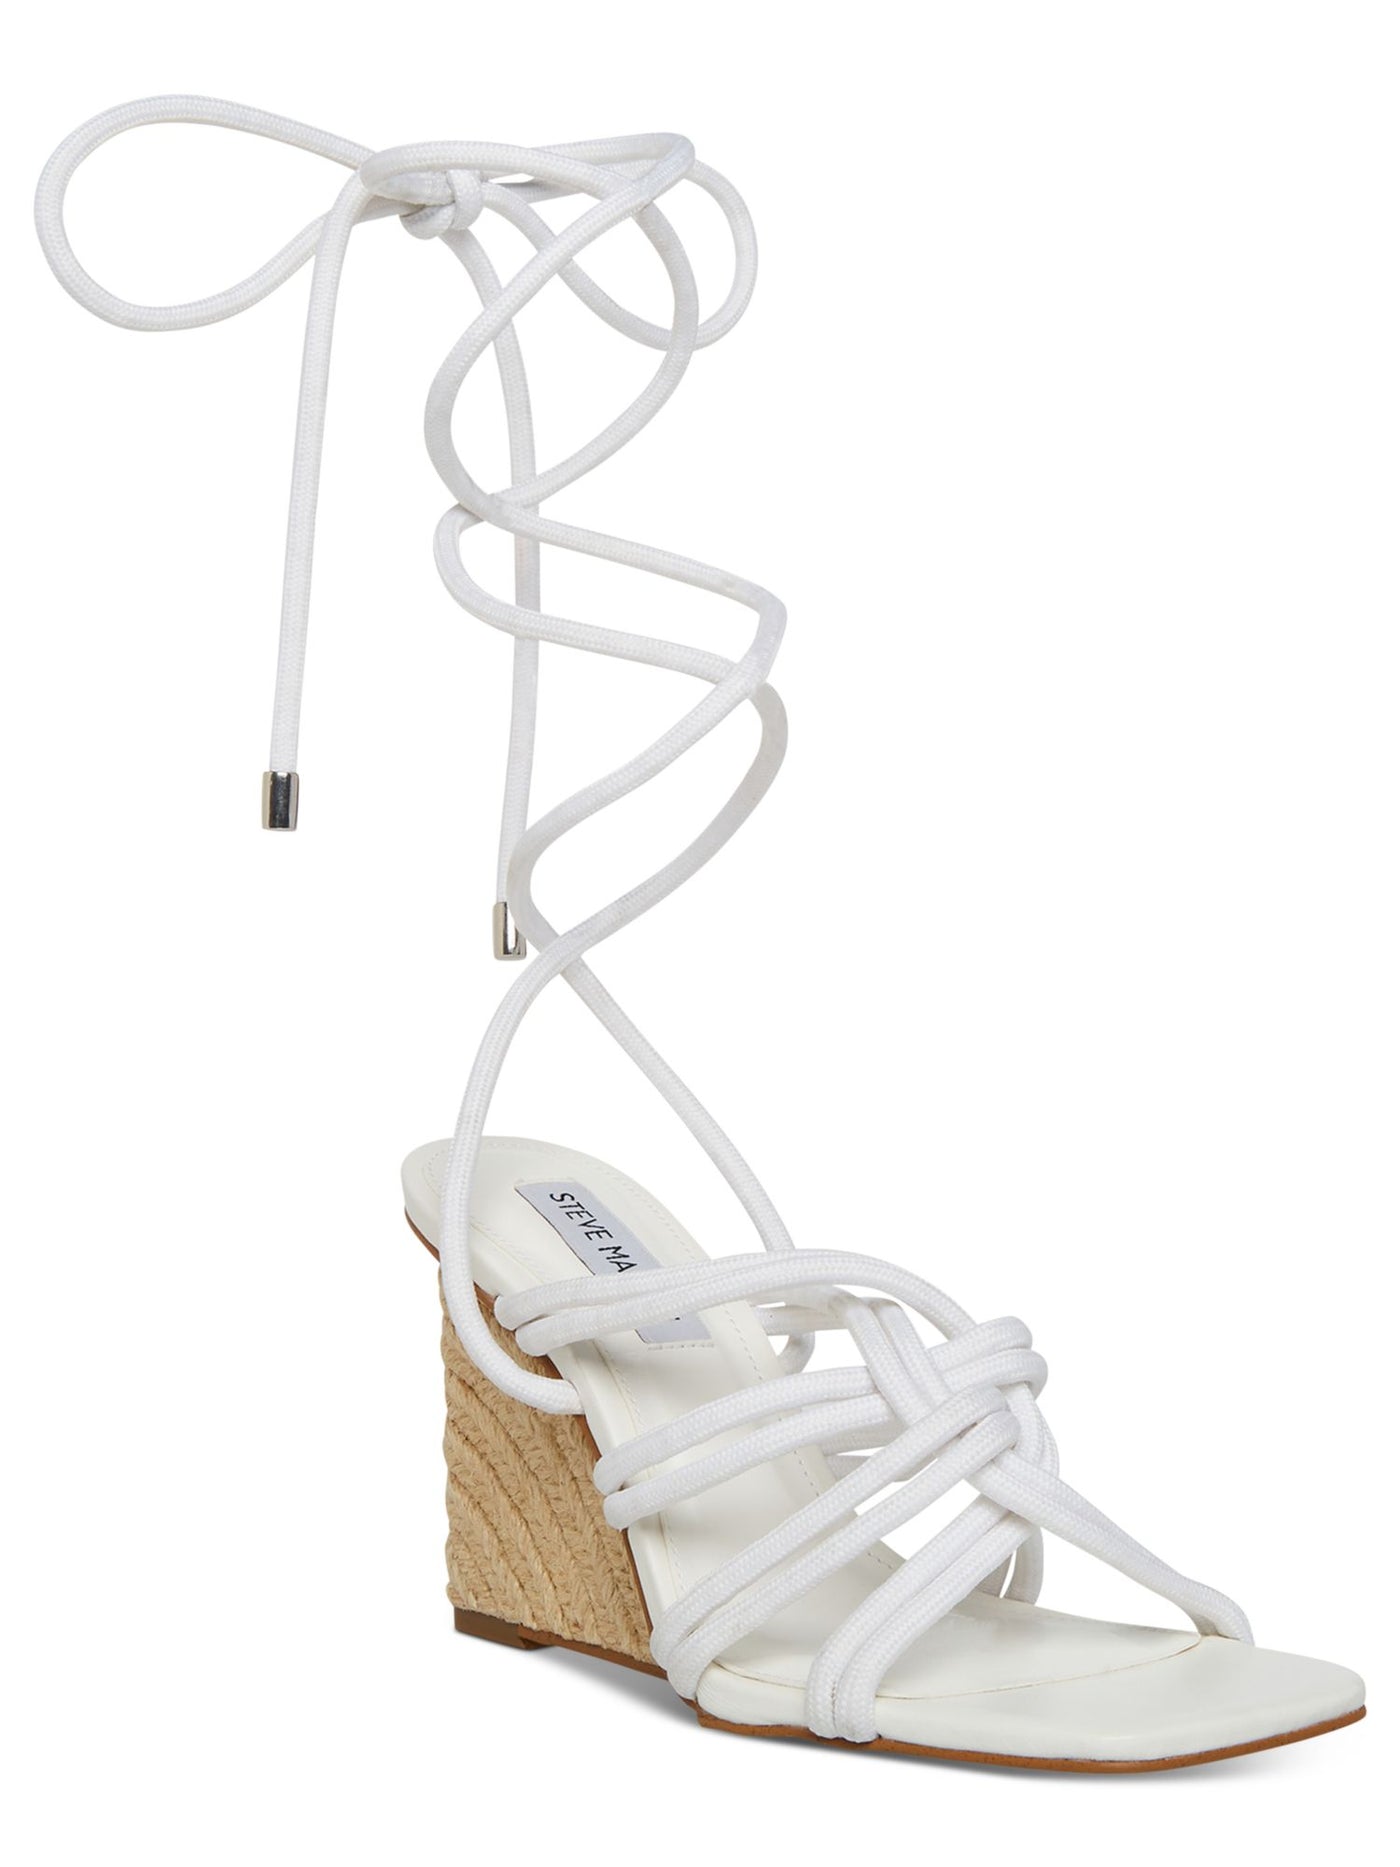 STEVE MADDEN Womens White Wrapping Ankle-Tie Padded Strappy Idolized Square Toe Wedge Lace-Up Espadrille Shoes 9 M